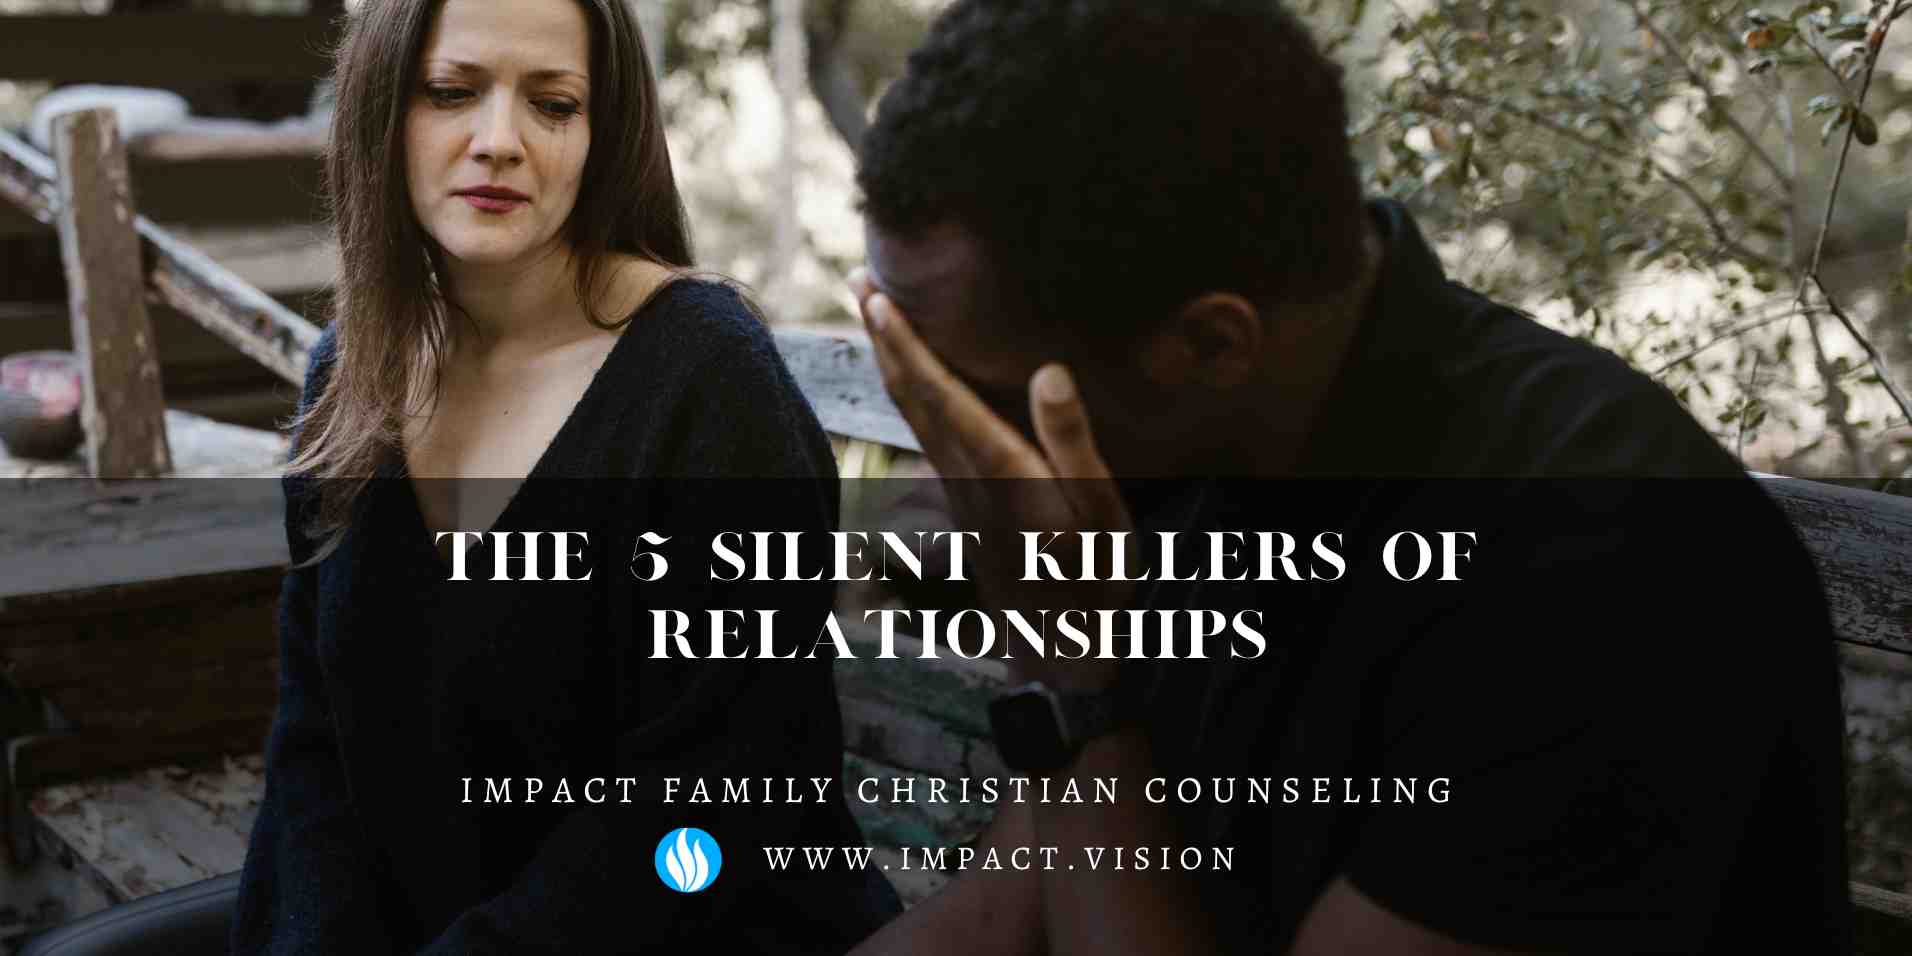 The 5 Silent Killers of Relationships